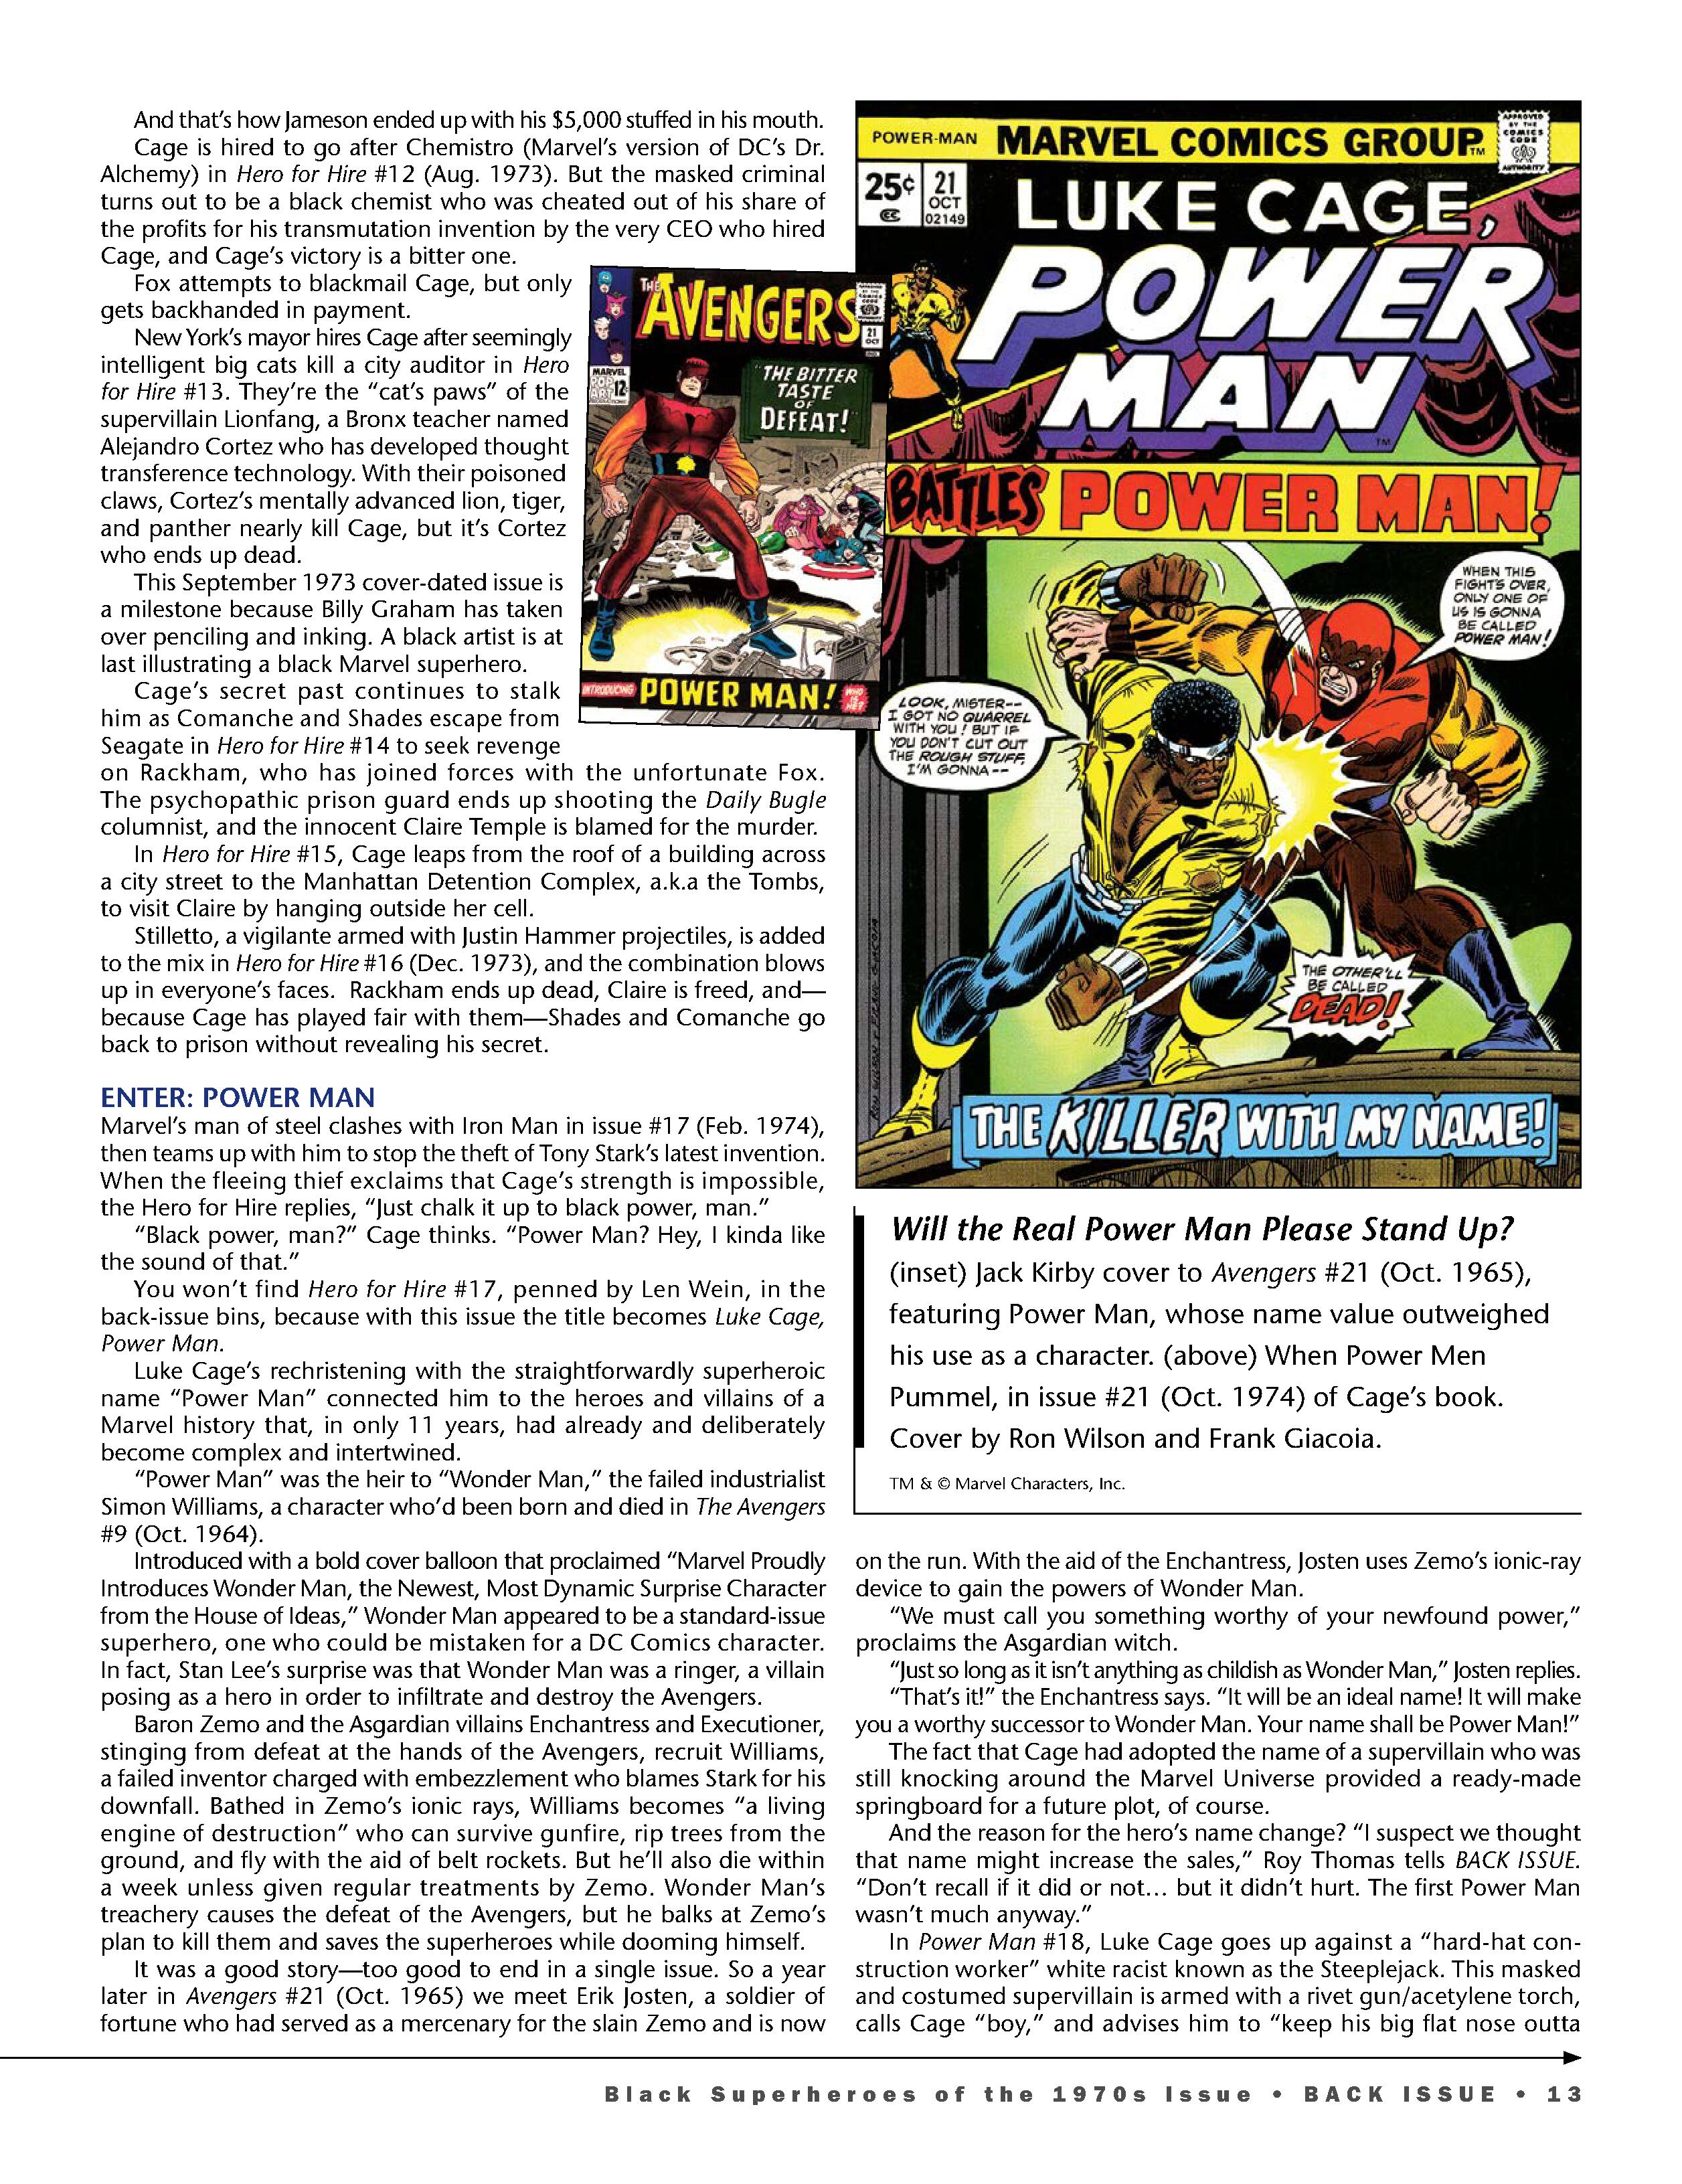 Read online Back Issue comic -  Issue #114 - 15